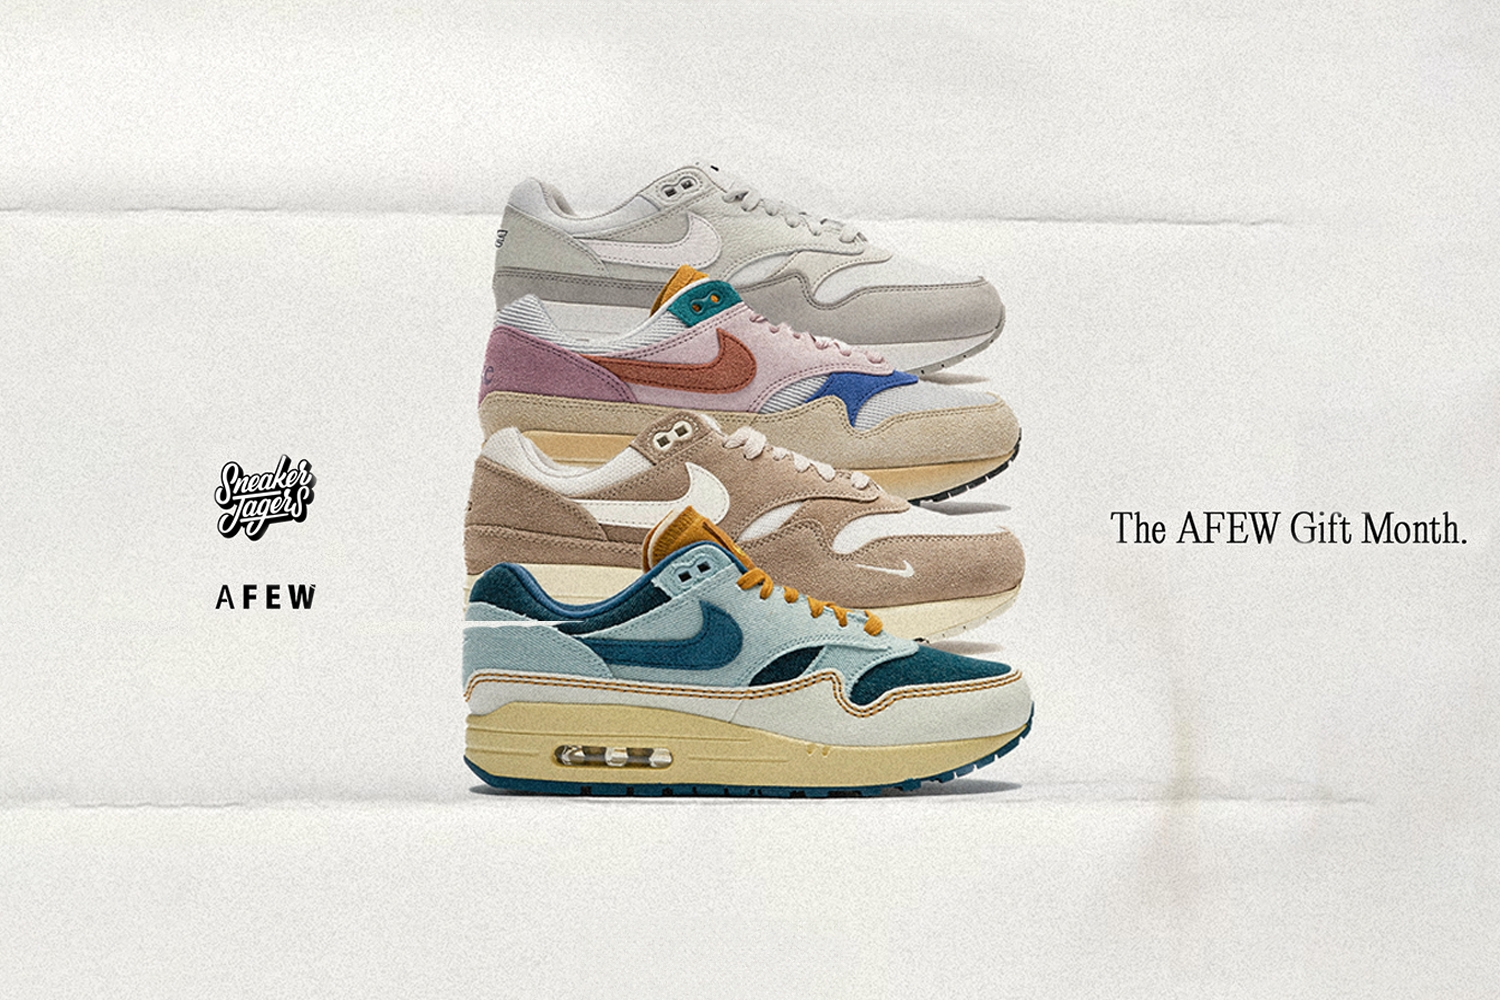 Letzte Chance! AFEW Gift Month x Sneakerjagers: das ist unser Air Max 1 Giveaway